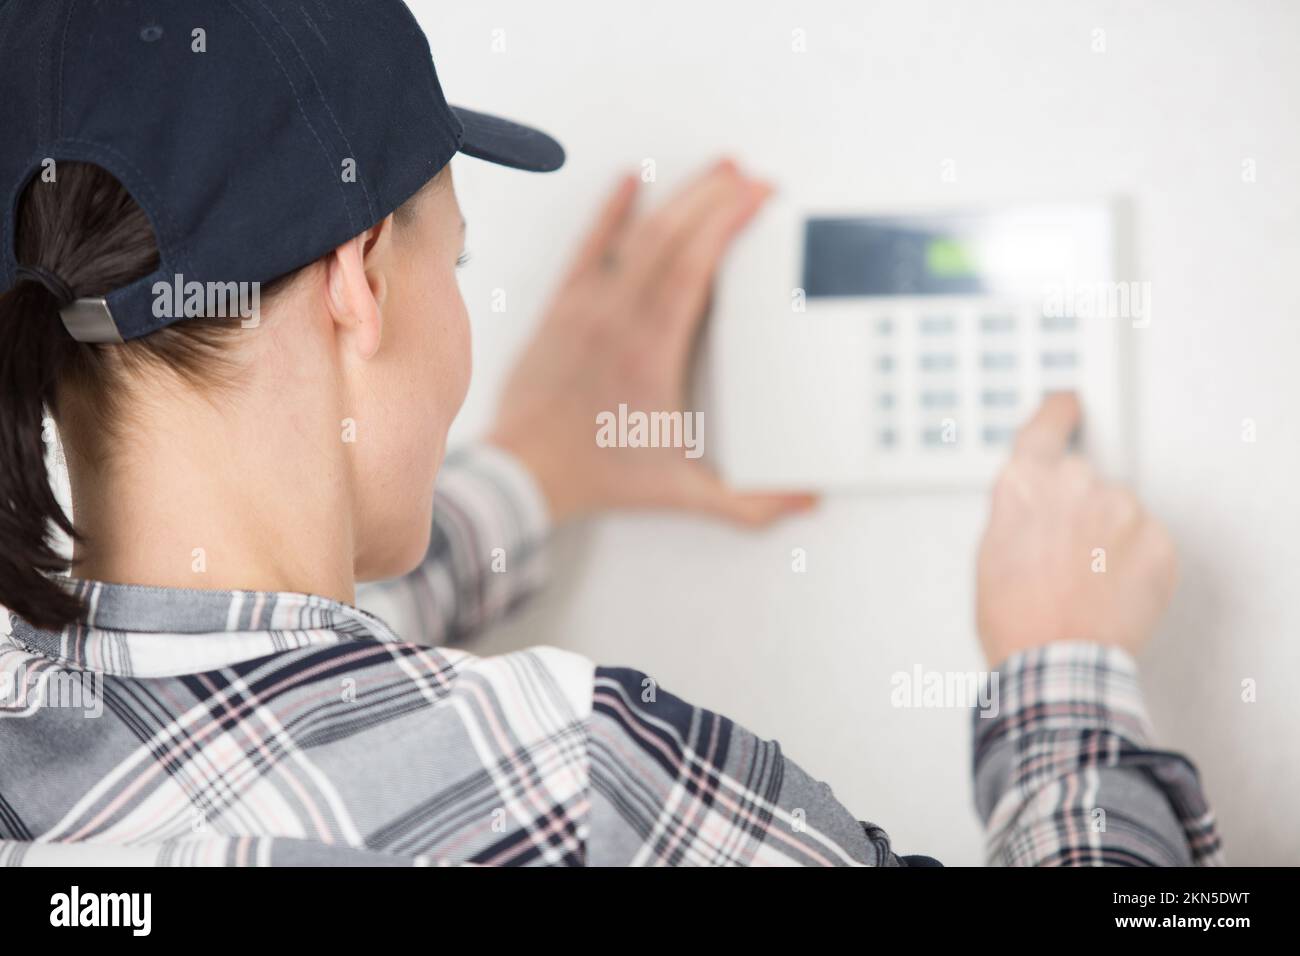 electrician woman installing a wall thermostat Stock Photo